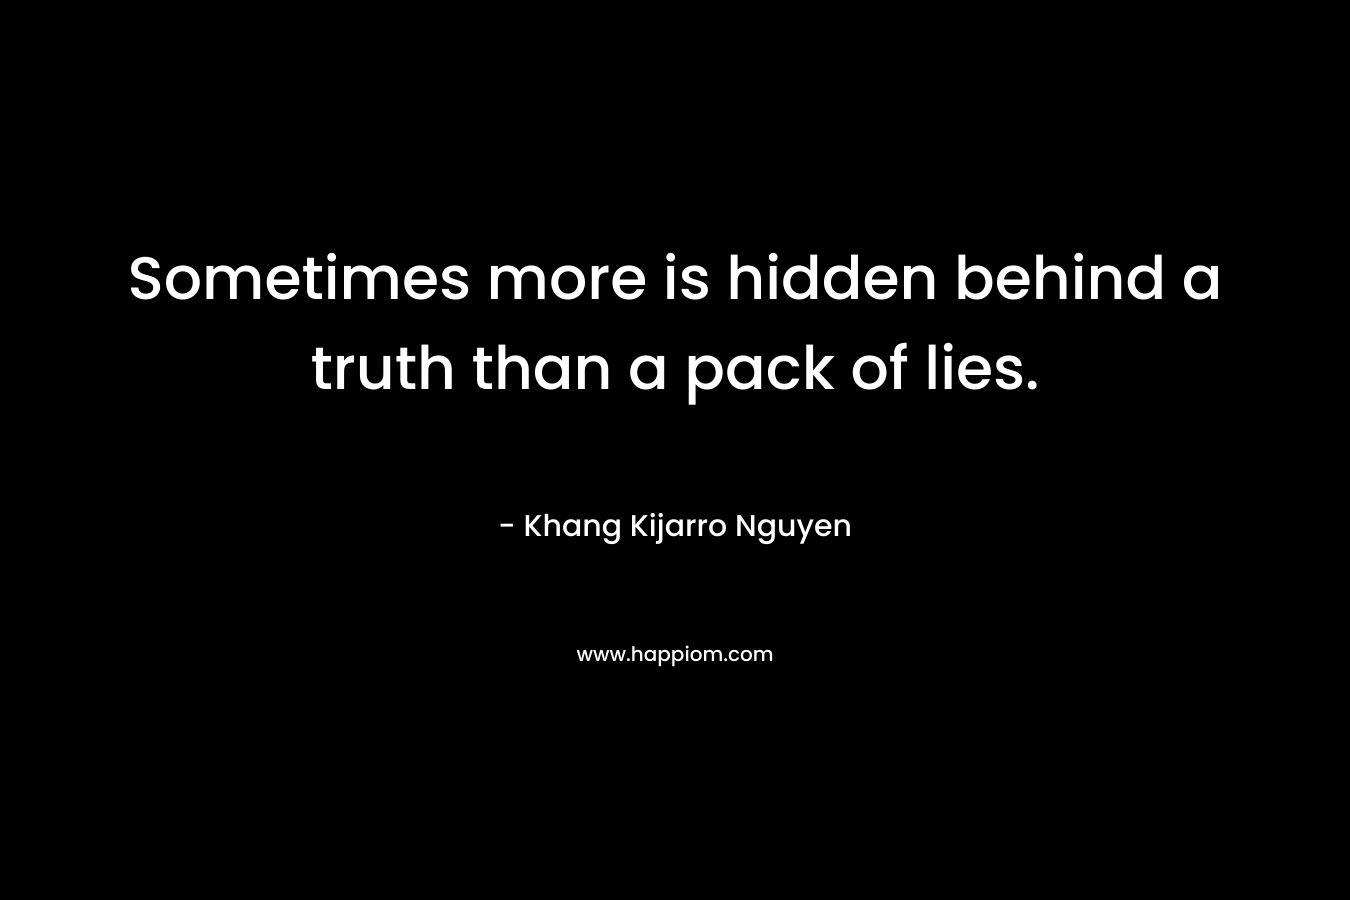 Sometimes more is hidden behind a truth than a pack of lies.